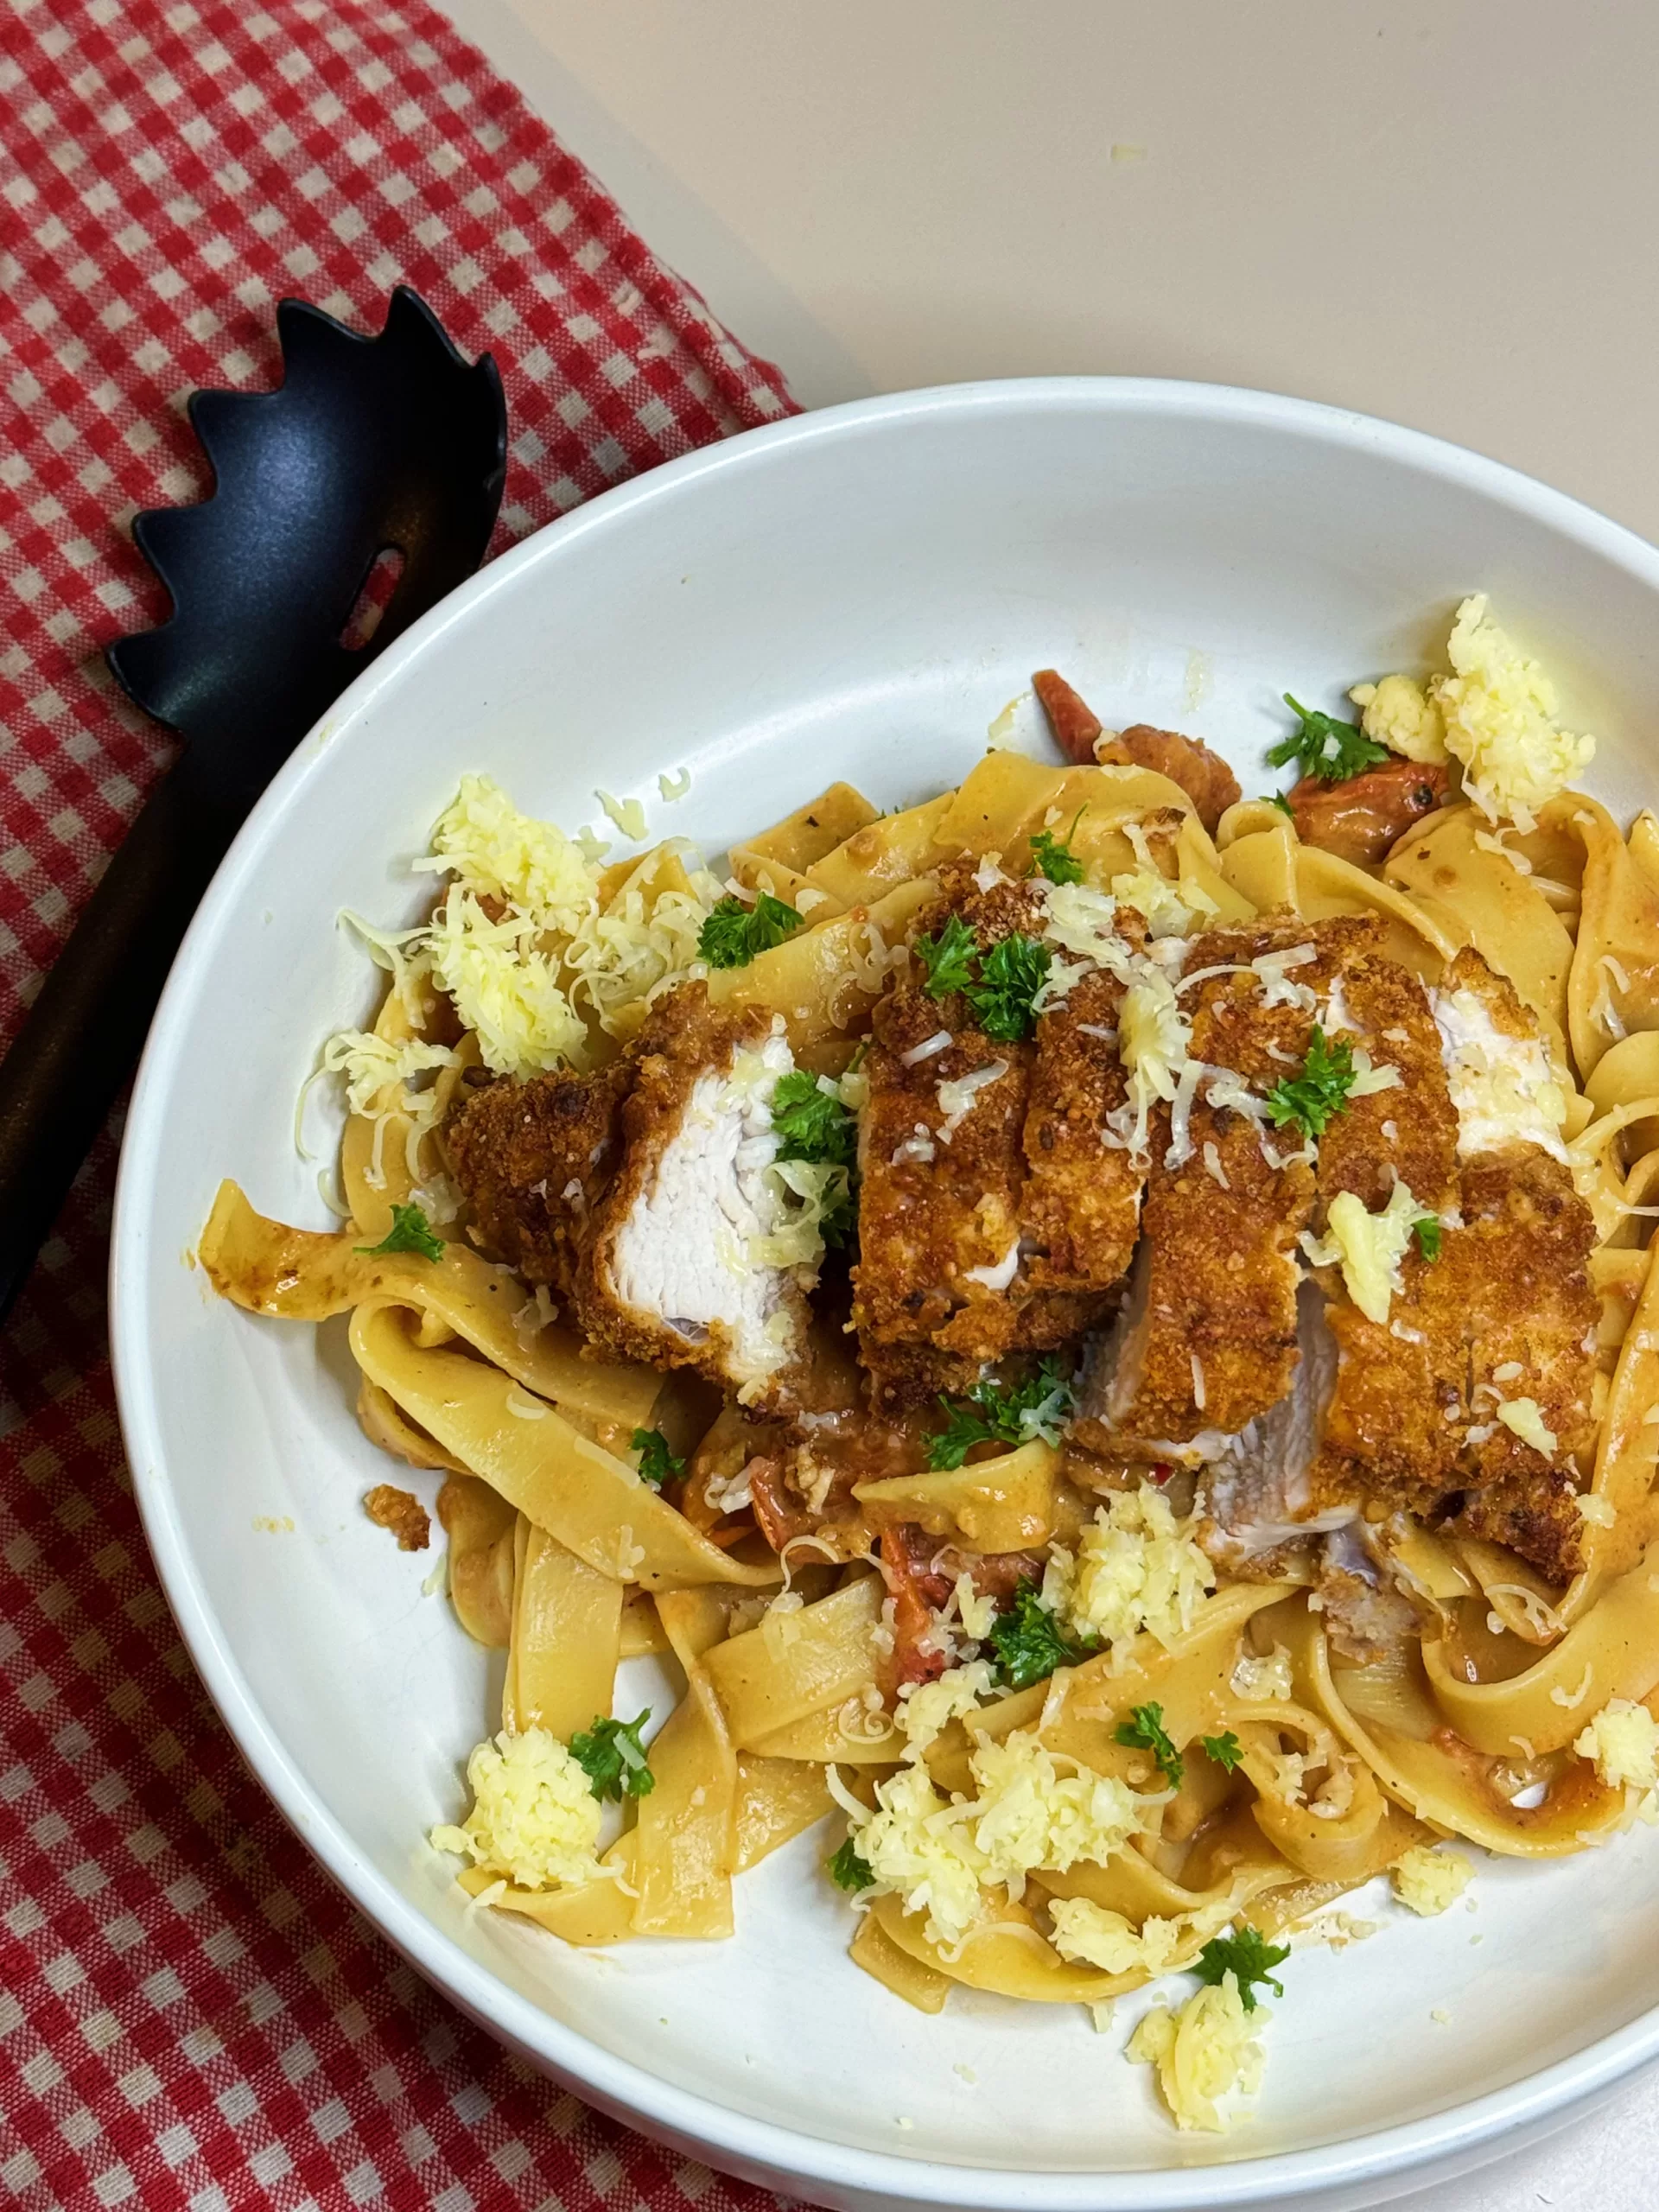 A photo of a delicious plate of chicken pasta, showcasing a nutritious meal option provided by our online weight loss nutritionist and personal trainer.